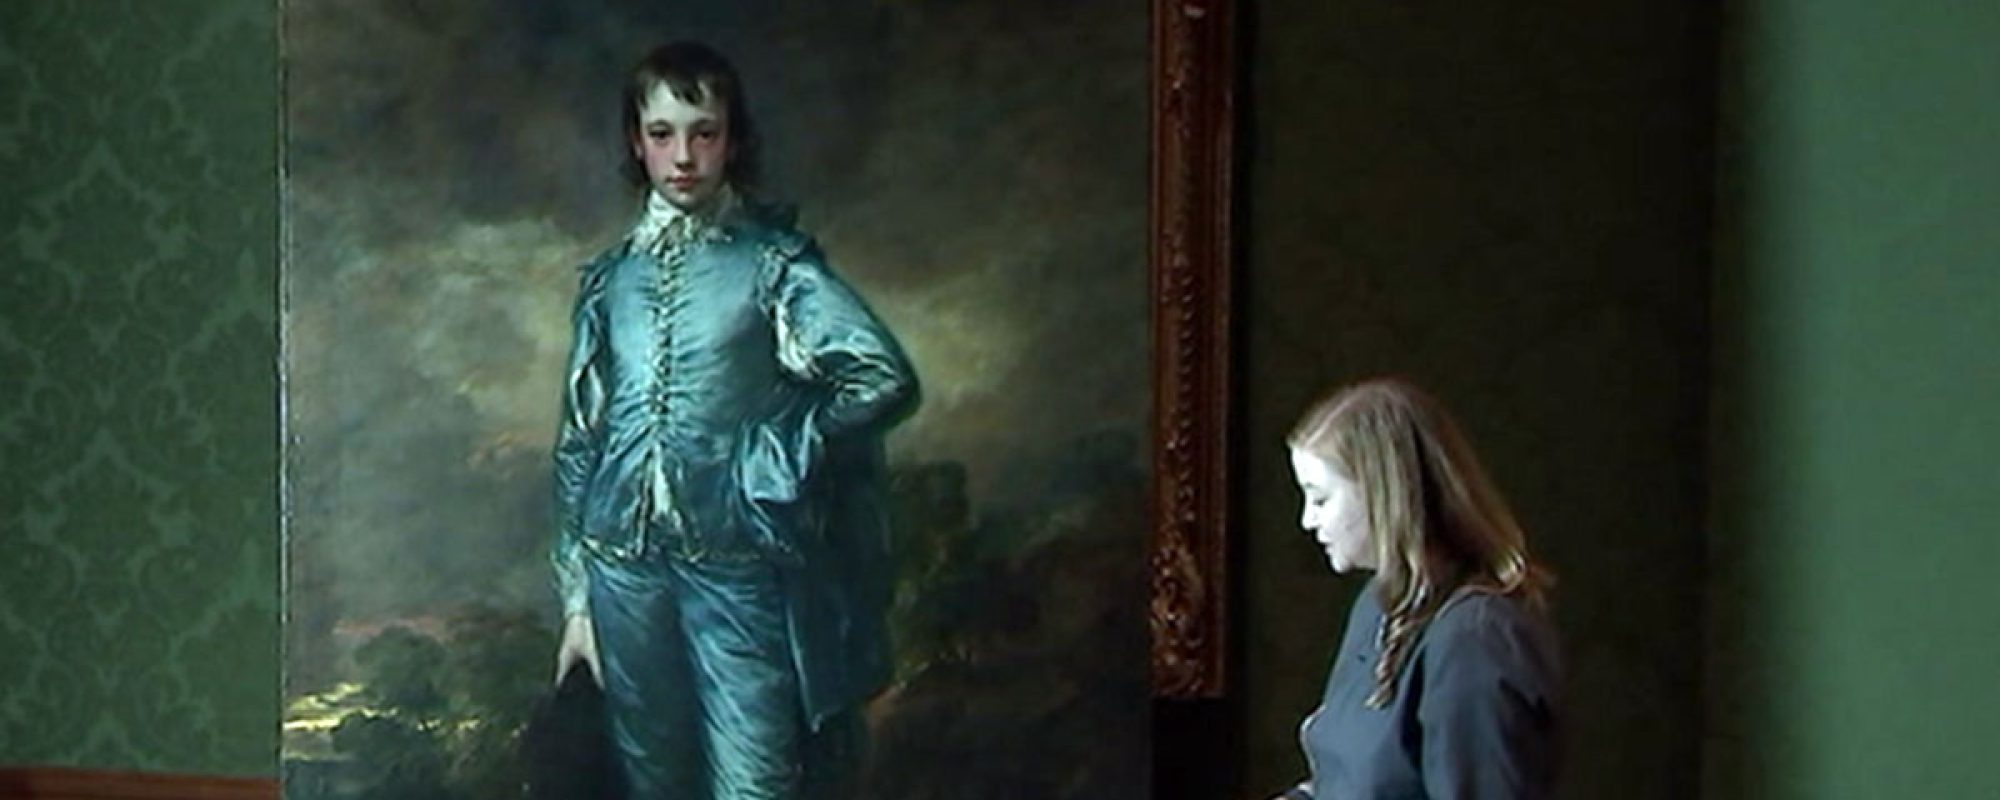 PROJECT BLUE BOY REVALS DOG, OTHER CONSERVATION FINDINGS BENEATH SURFACE OF ICONIC PAINTING